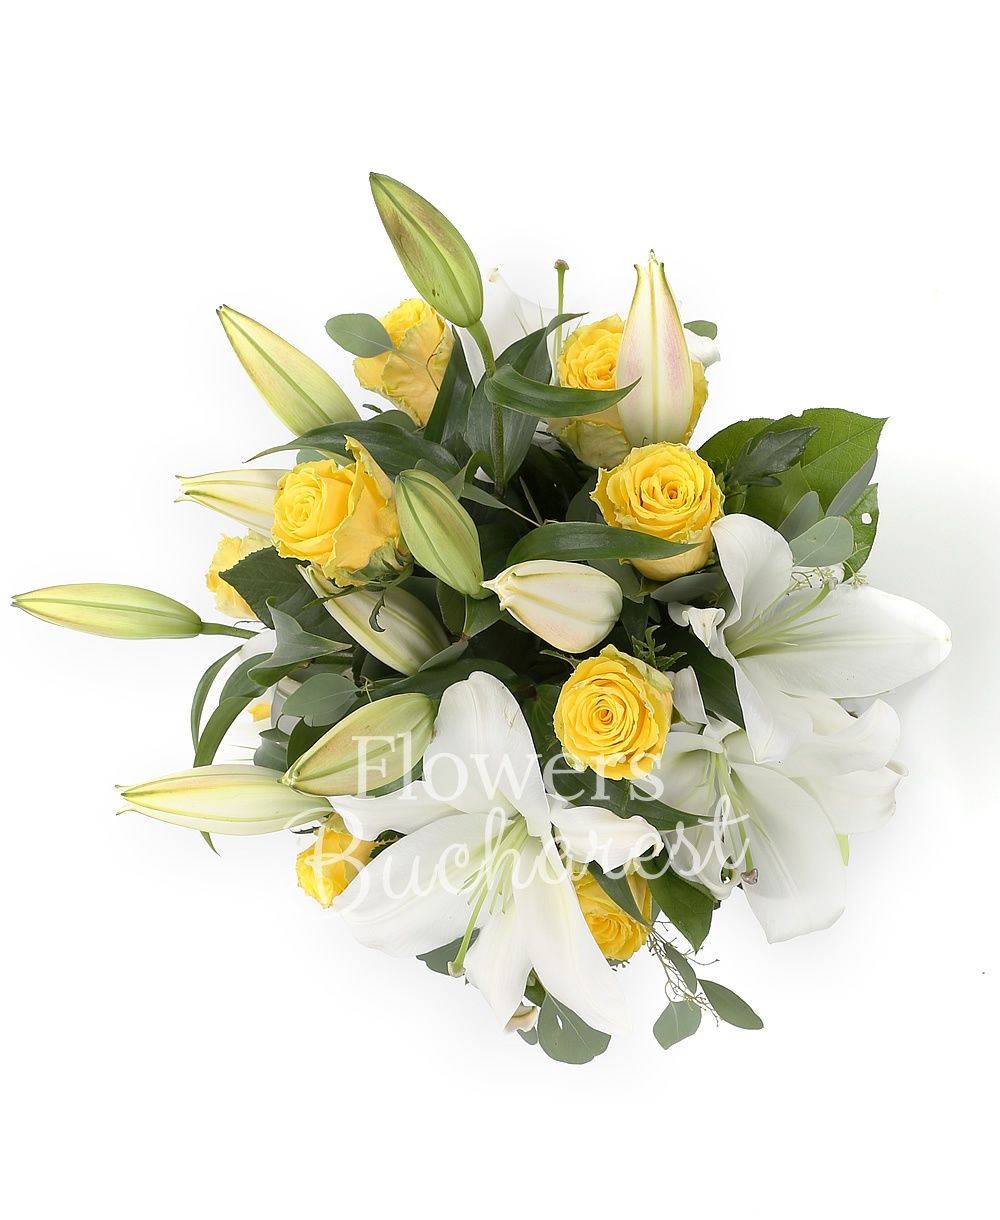 9 yellow roses, 4 white lilies, greenery